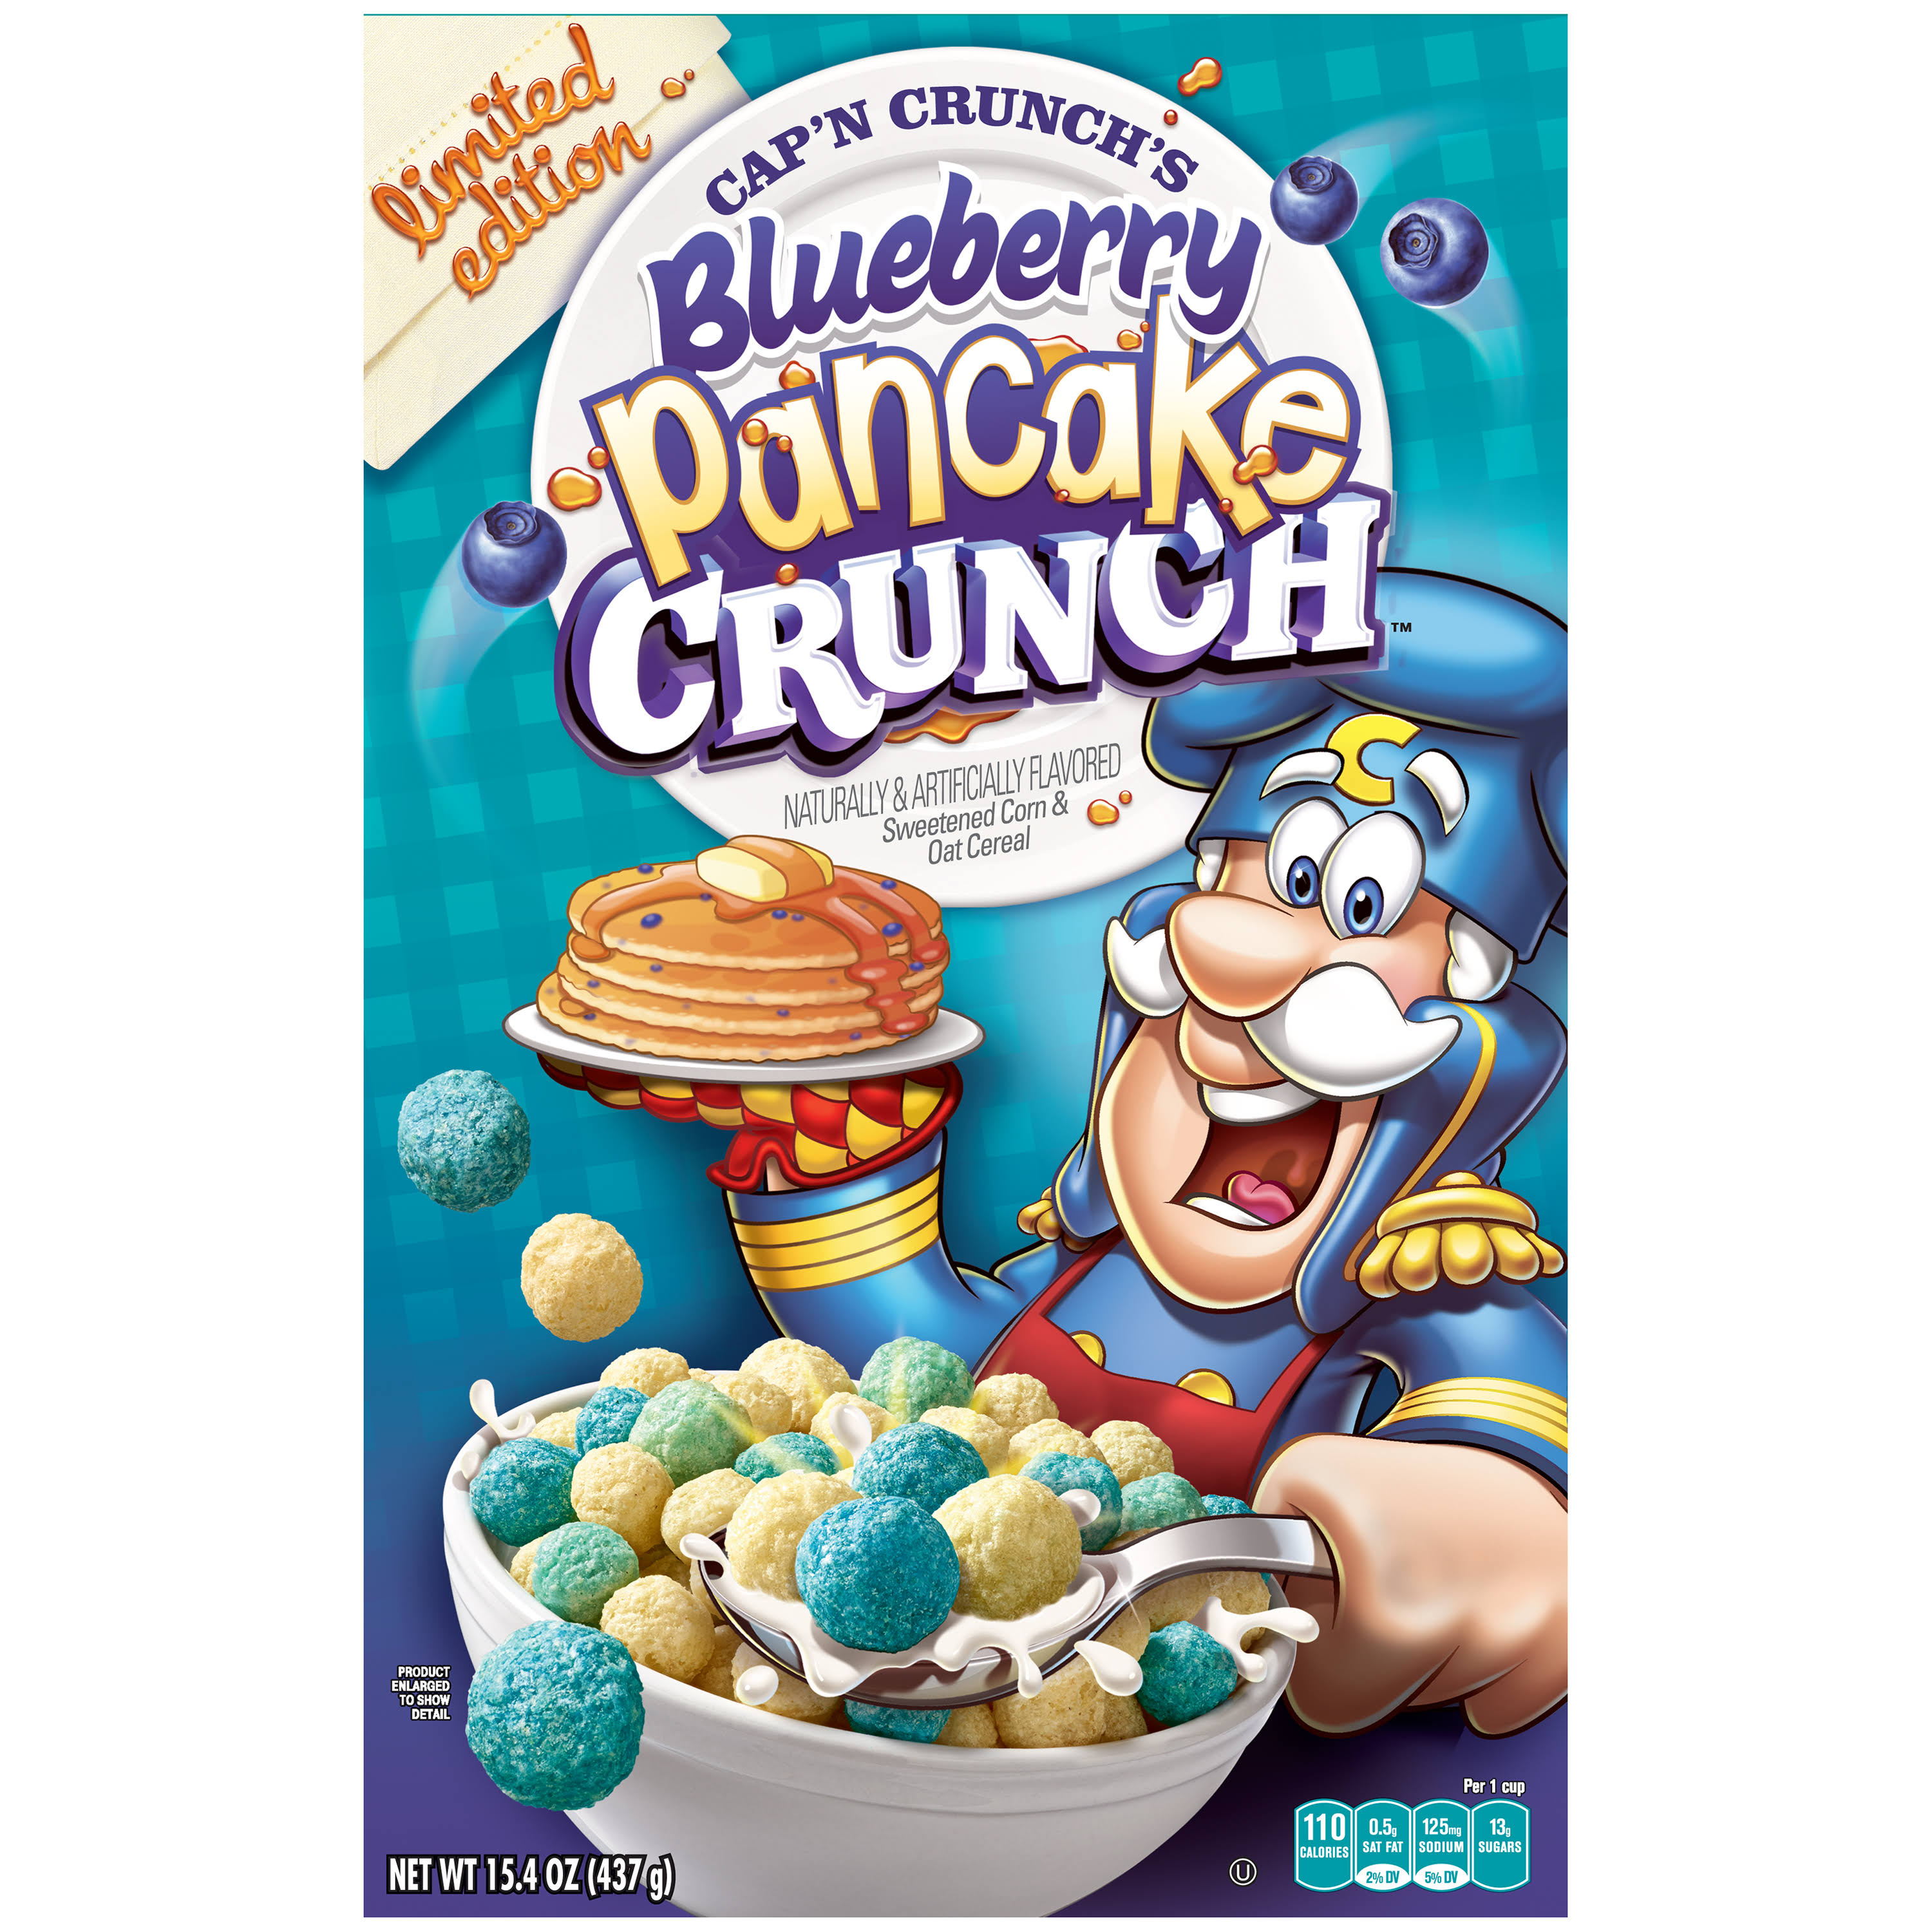 News Cap'n Crunch's Blueberry Pancake Crunch Cereal is Here!